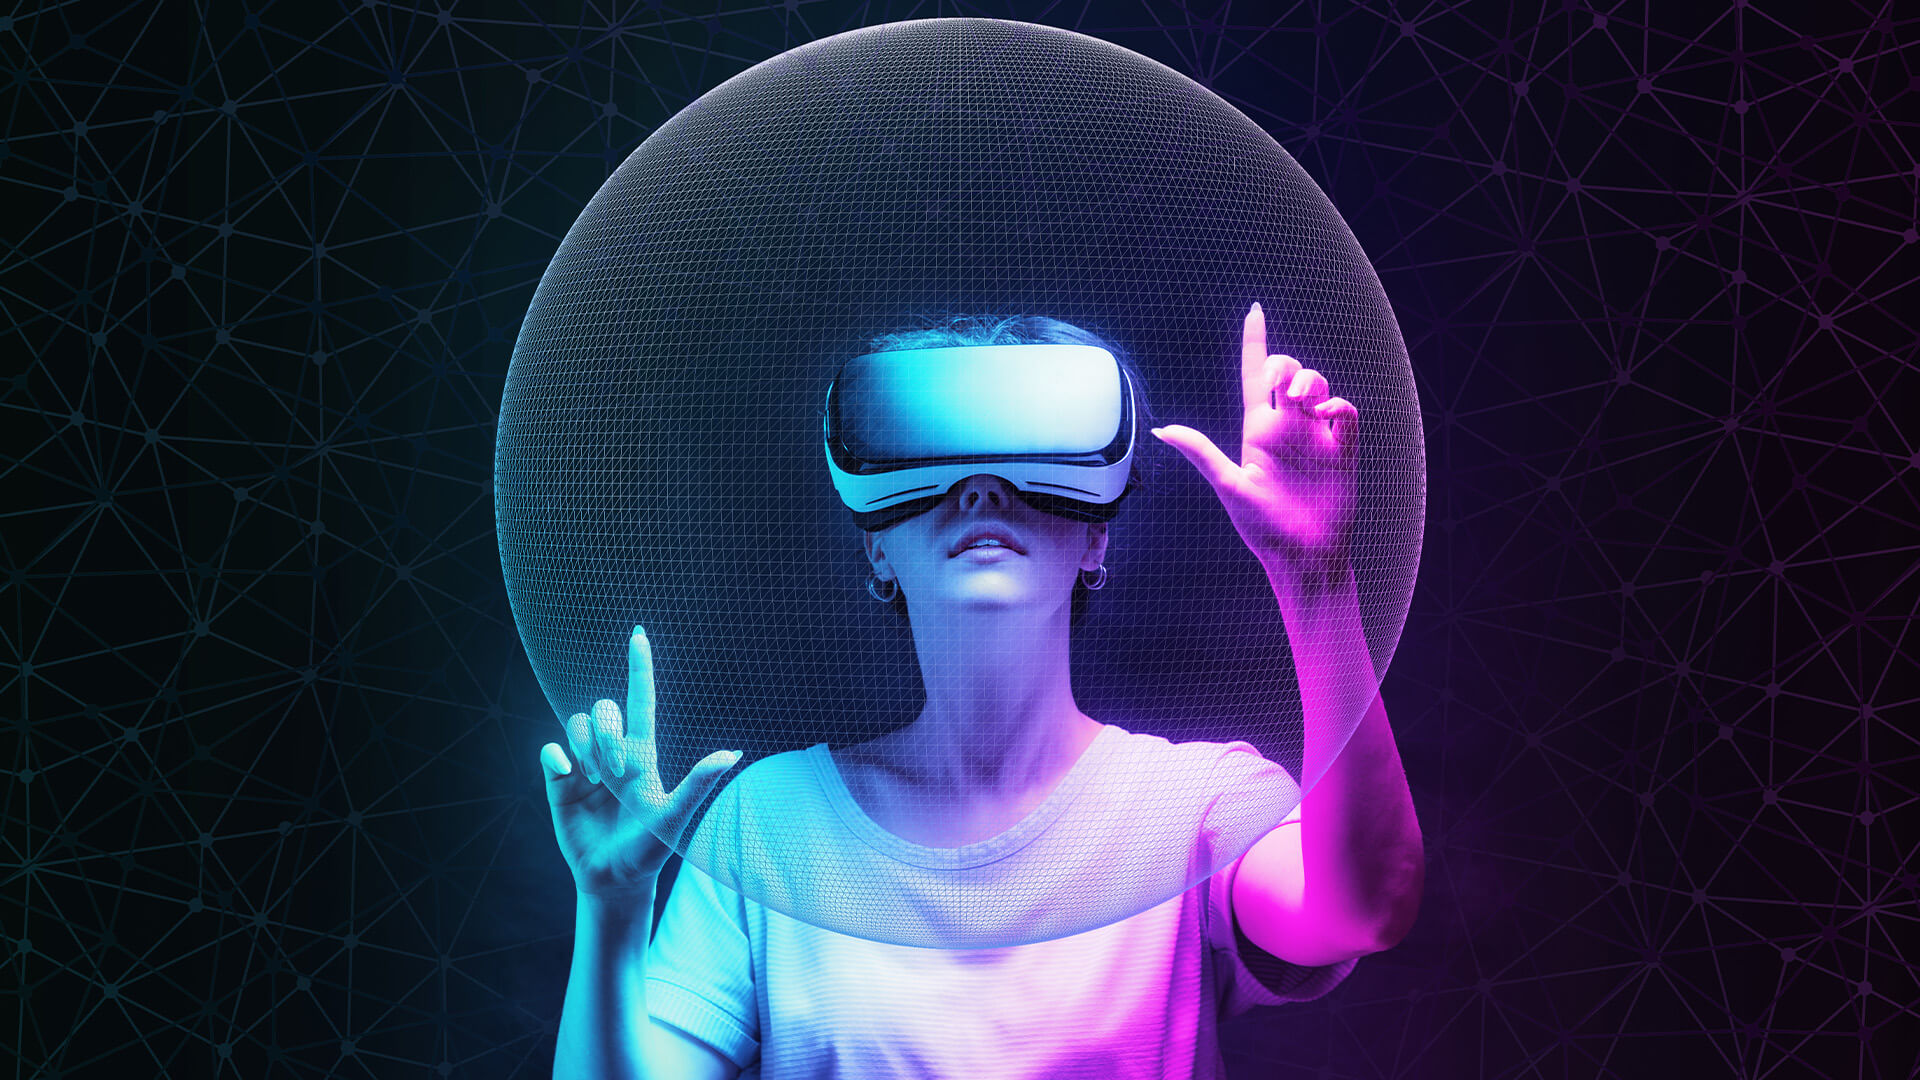 Portrait of young woman in VR glasses creates mesh sphere.